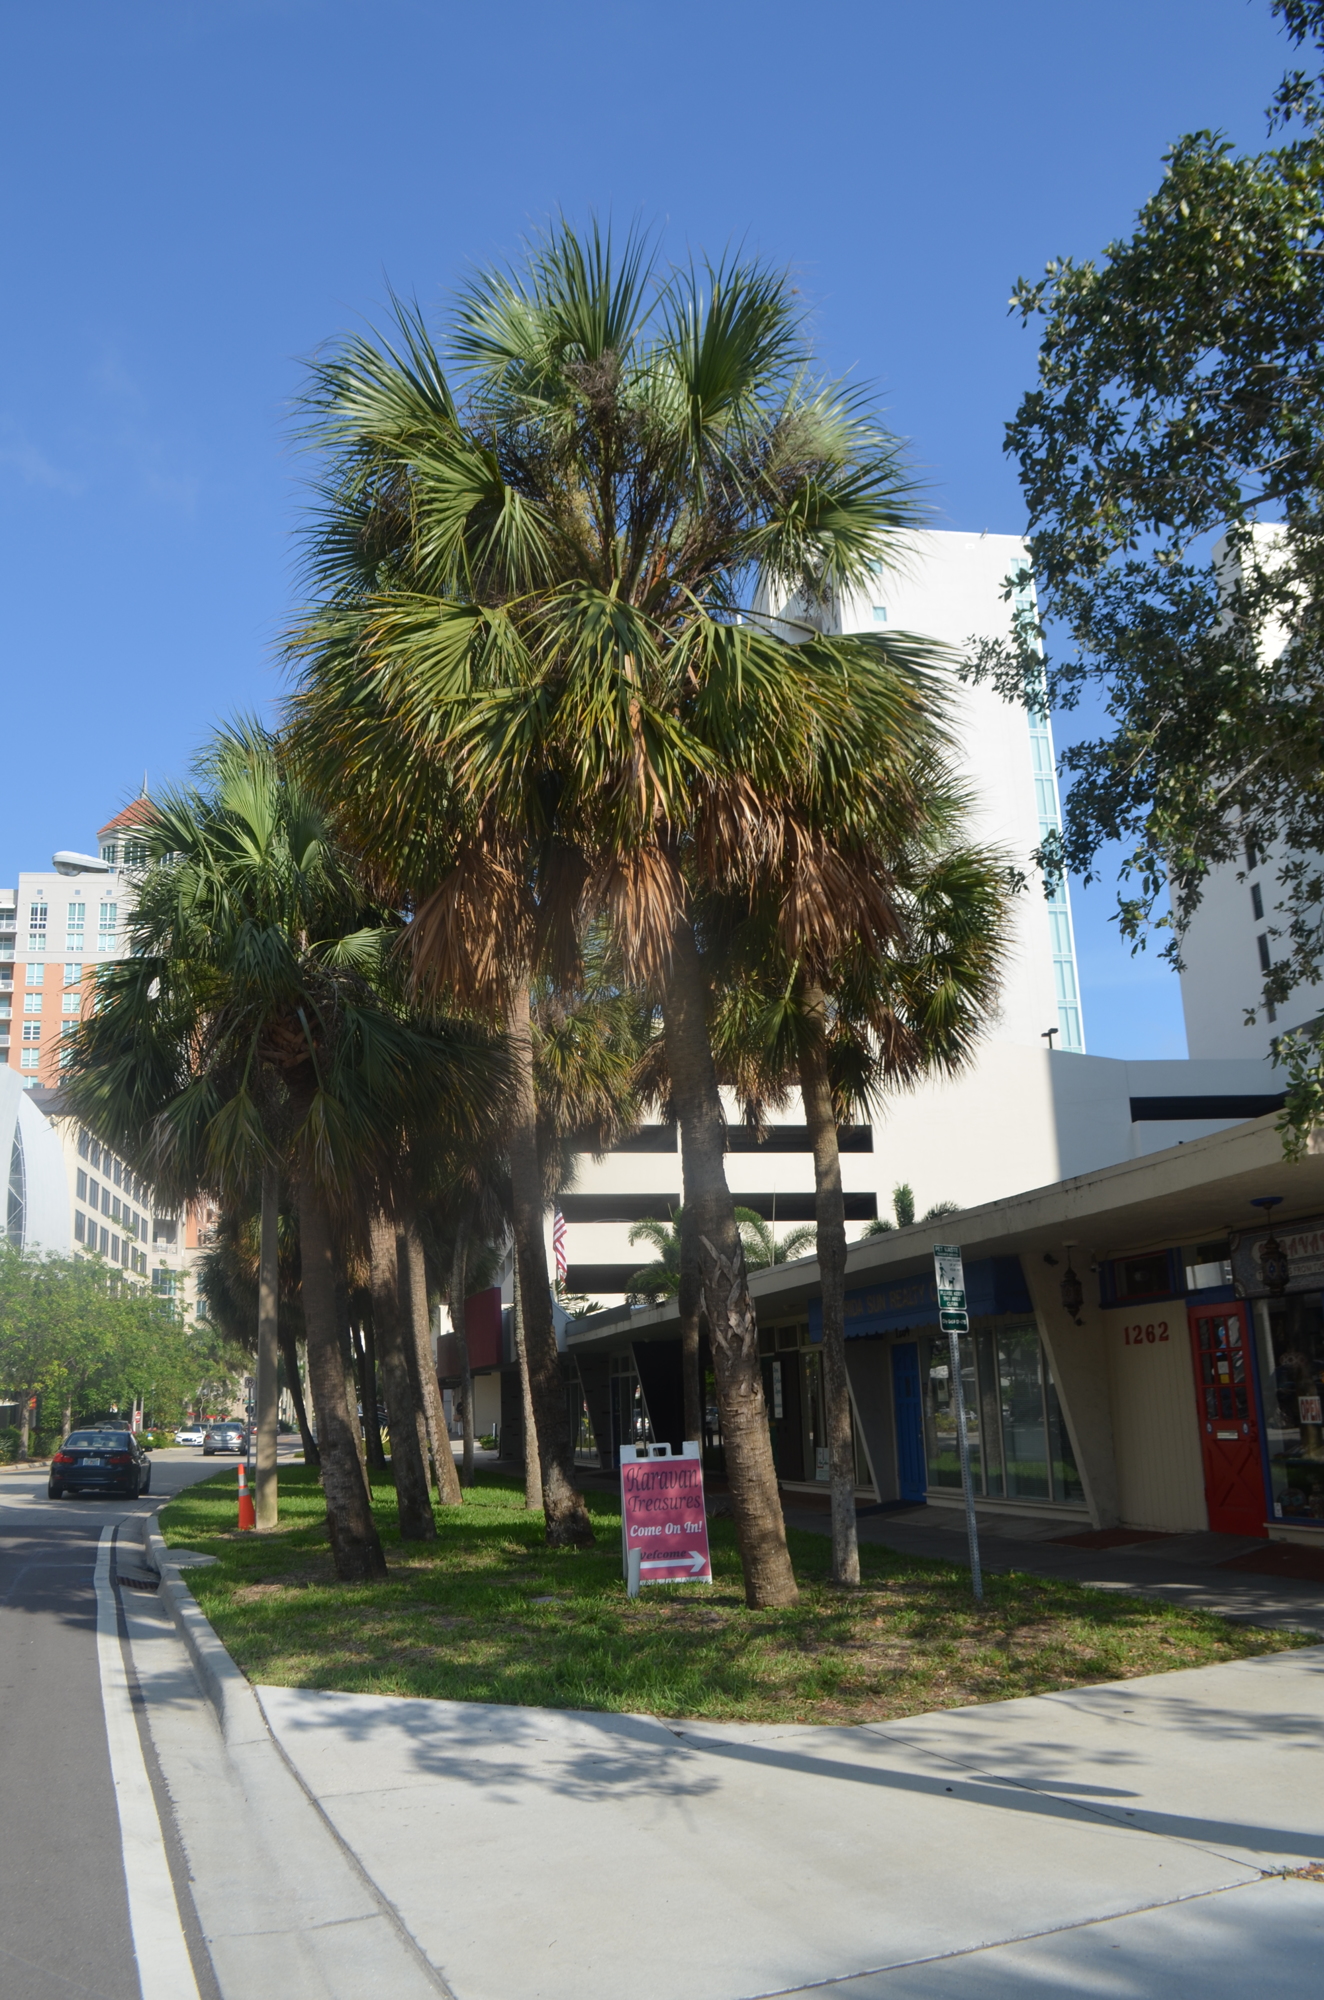 The city delayed and redesigned the streetscape project to preserve 27 palm trees.